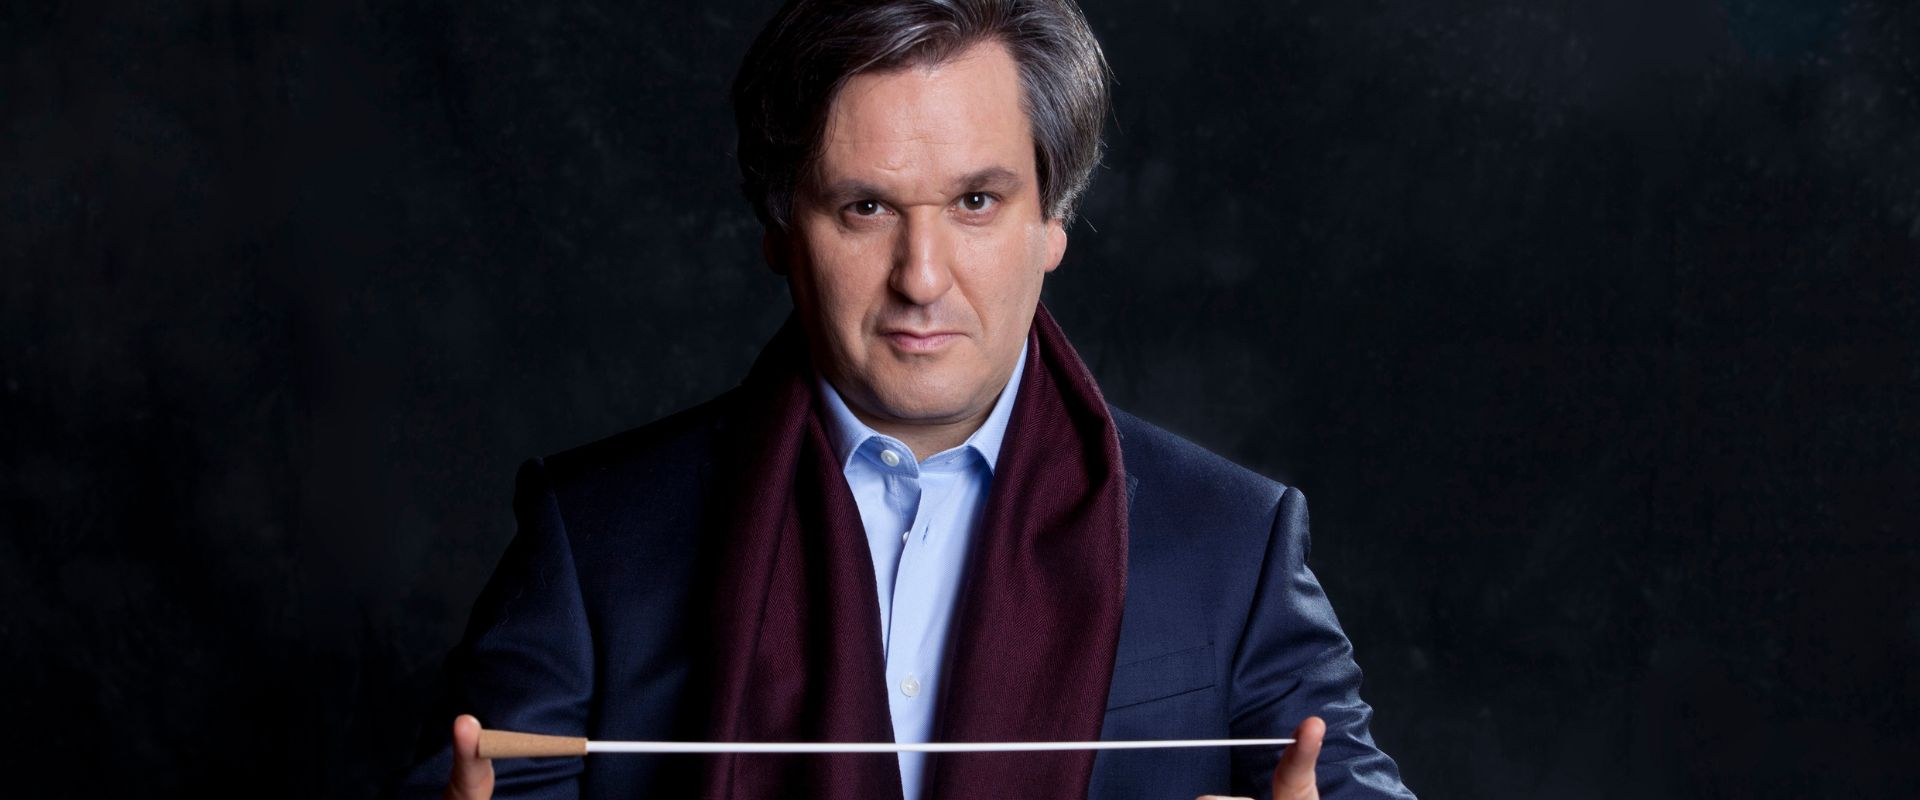 Antonio Pappano to conduct twice in Warsaw during the “Chopin and His Europe” Festival